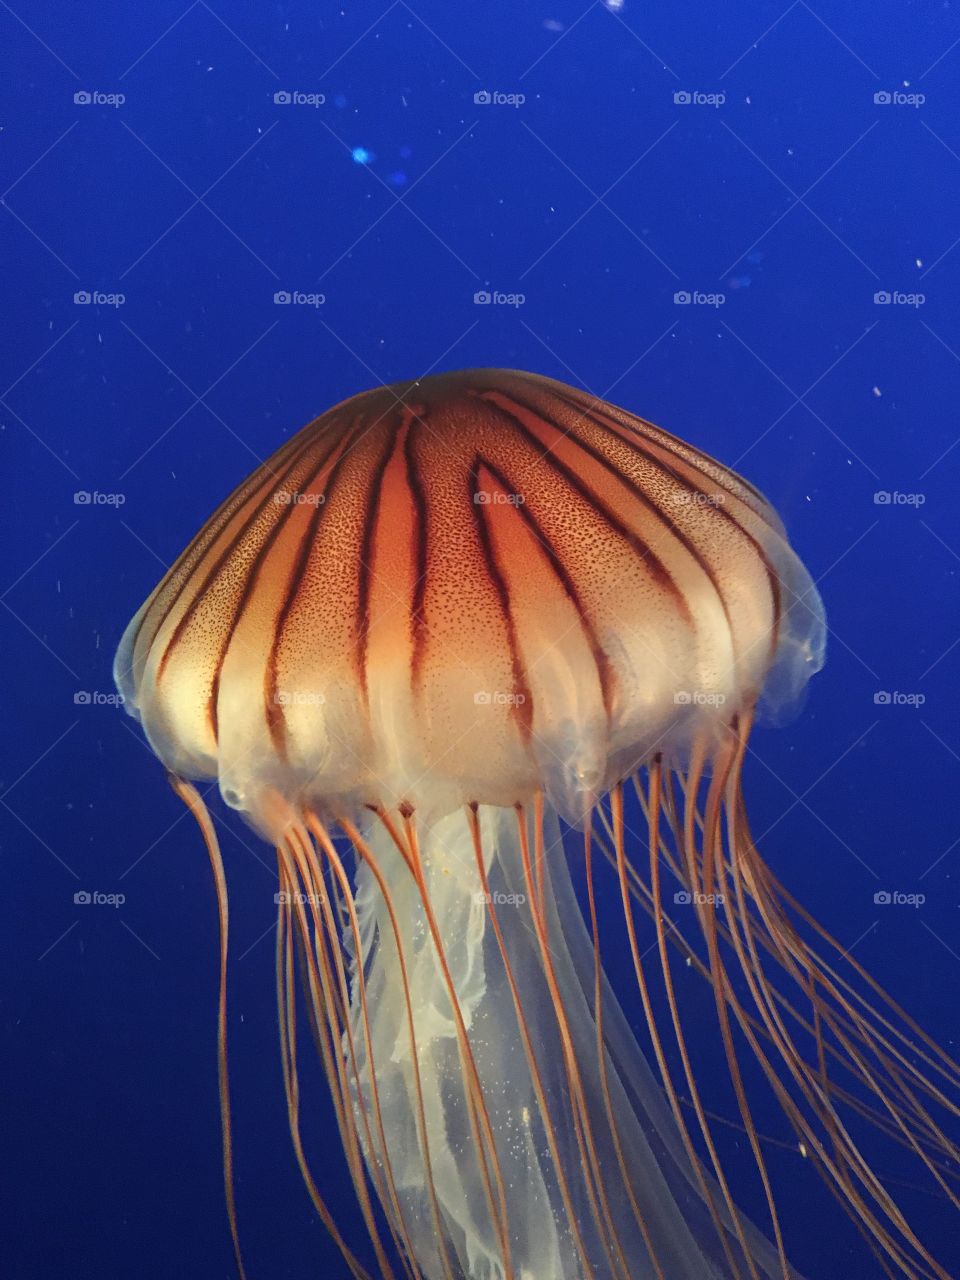 A beautiful orange jellyfish, against a deep blue background, with flowing tentacles.